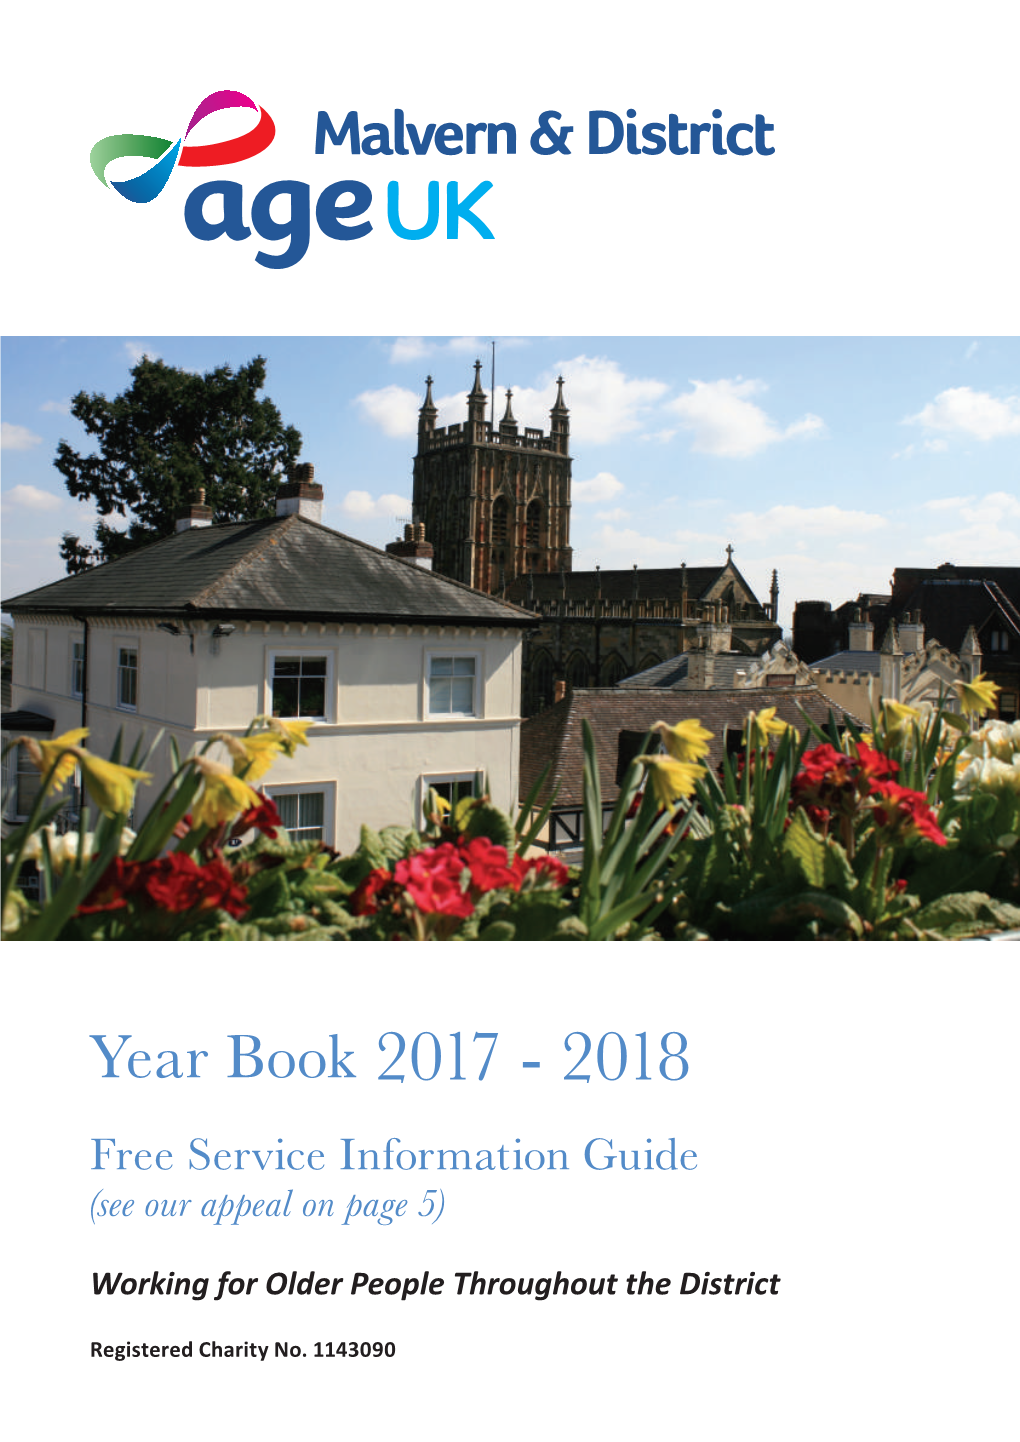 Year Book 2017 - 2018 Free Service Information Guide (See Our Appeal on Page 5)